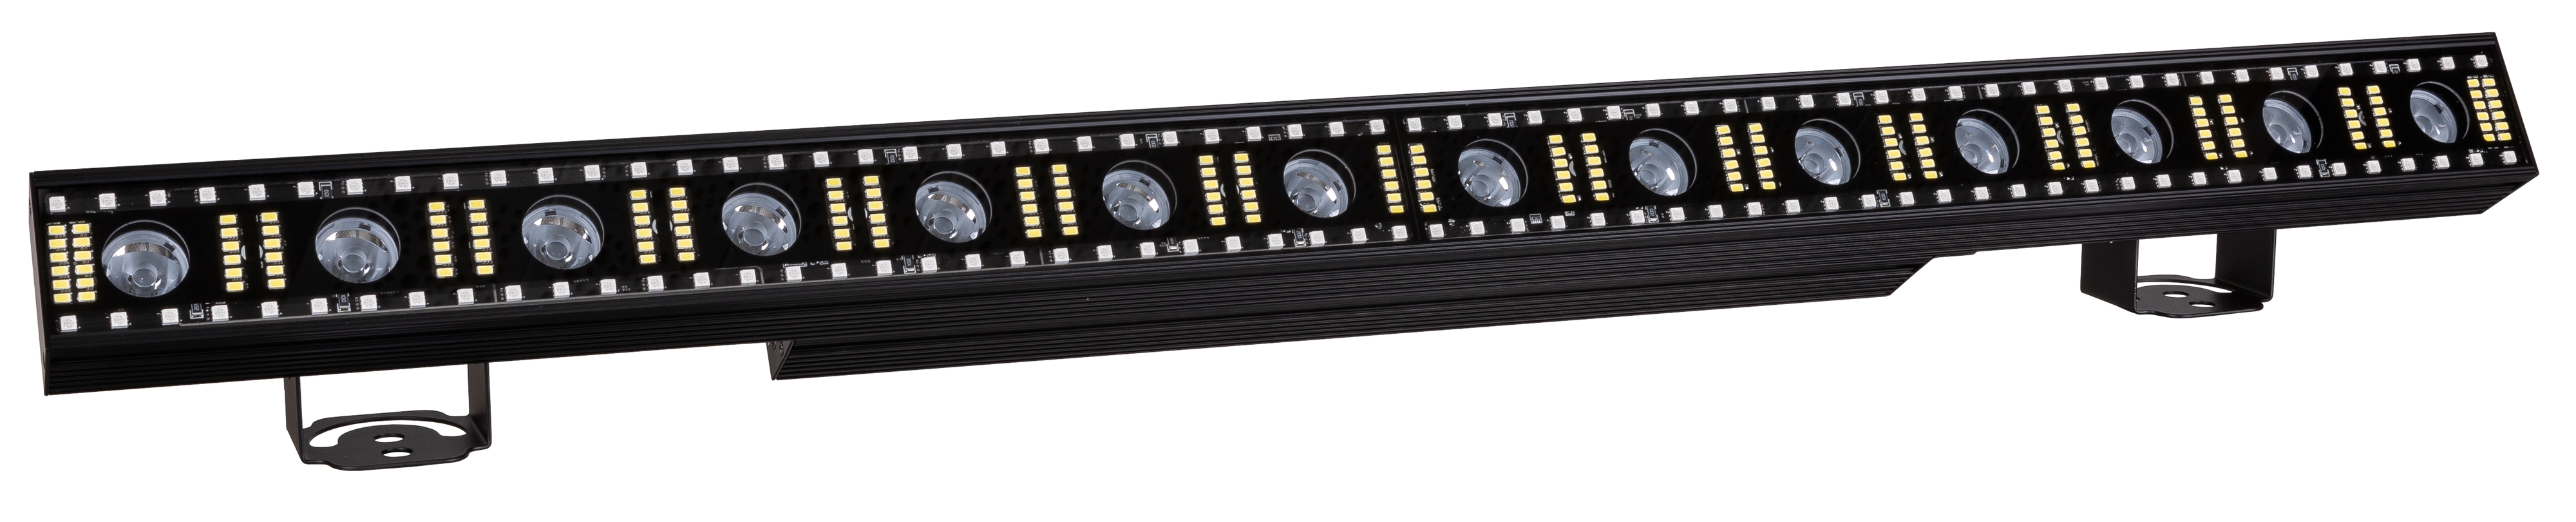 3in1 light bar with 14 warm white LEDs, 120 RGB LEDs and 180 cold white LEDs <p hidden>sunbar</p>